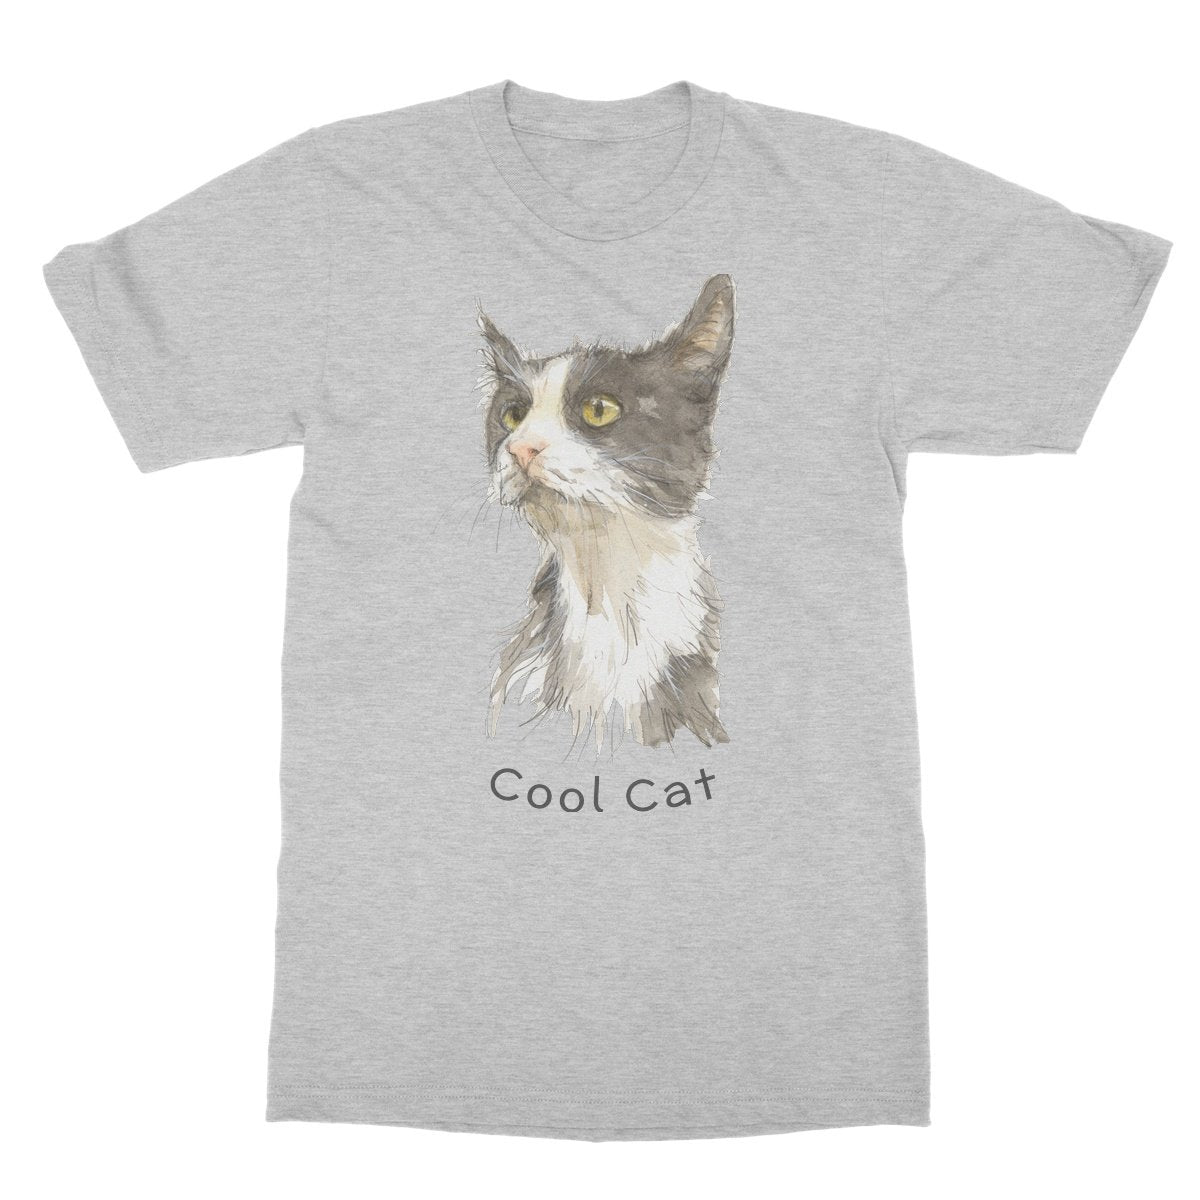 Unisex Softstyle T-Shirt - 'Cool Cat'